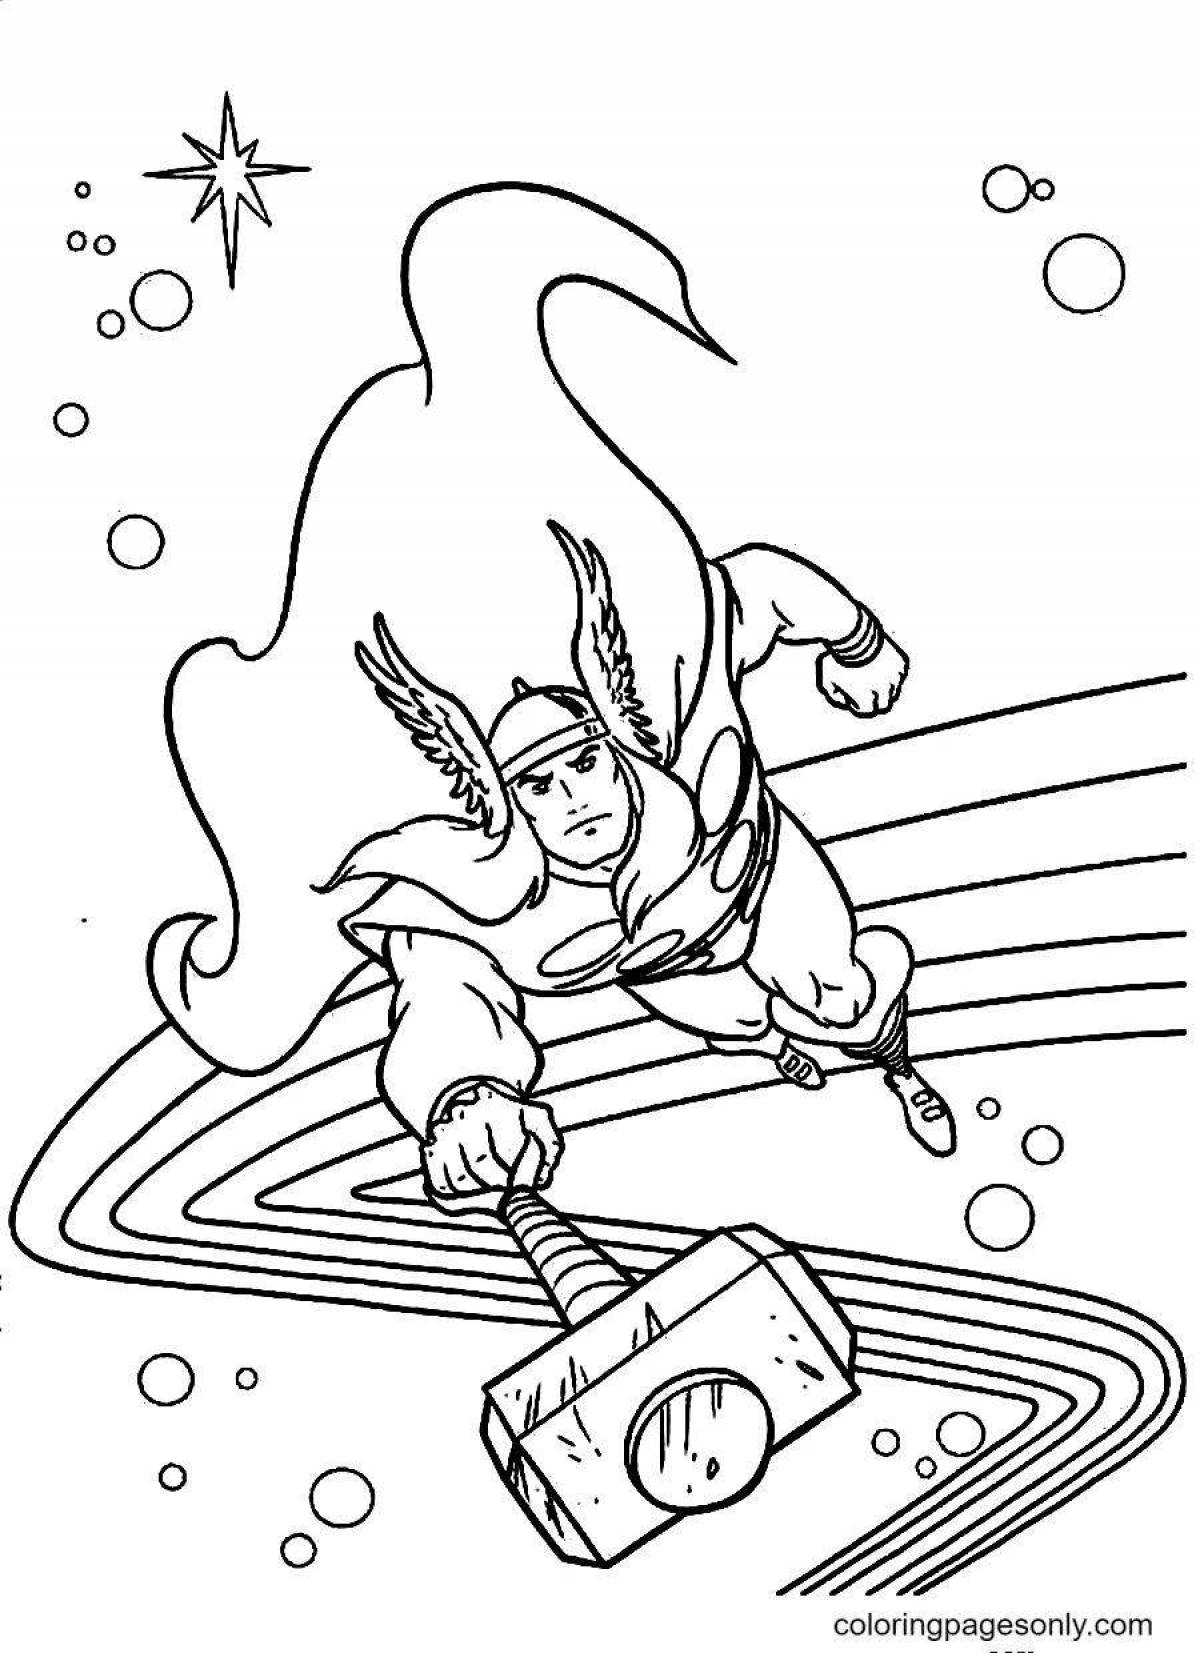 Colorful Thor coloring book for kids